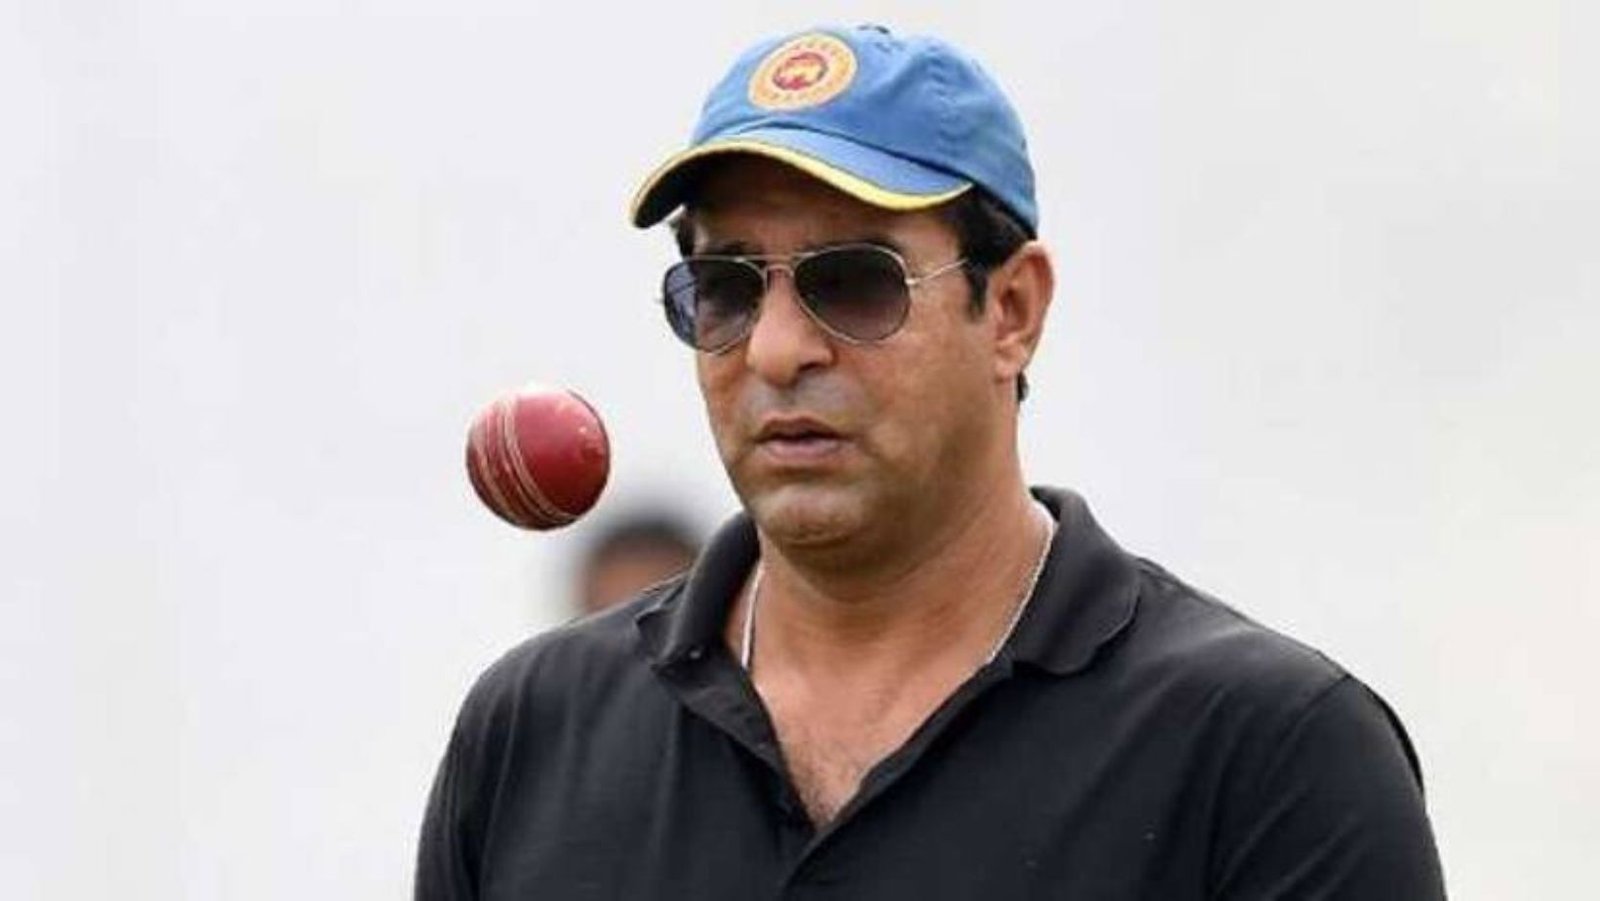 Wasim Akram Makes His Comeback to Cricket with a Record - breaking 50 and Iconic Yorkers